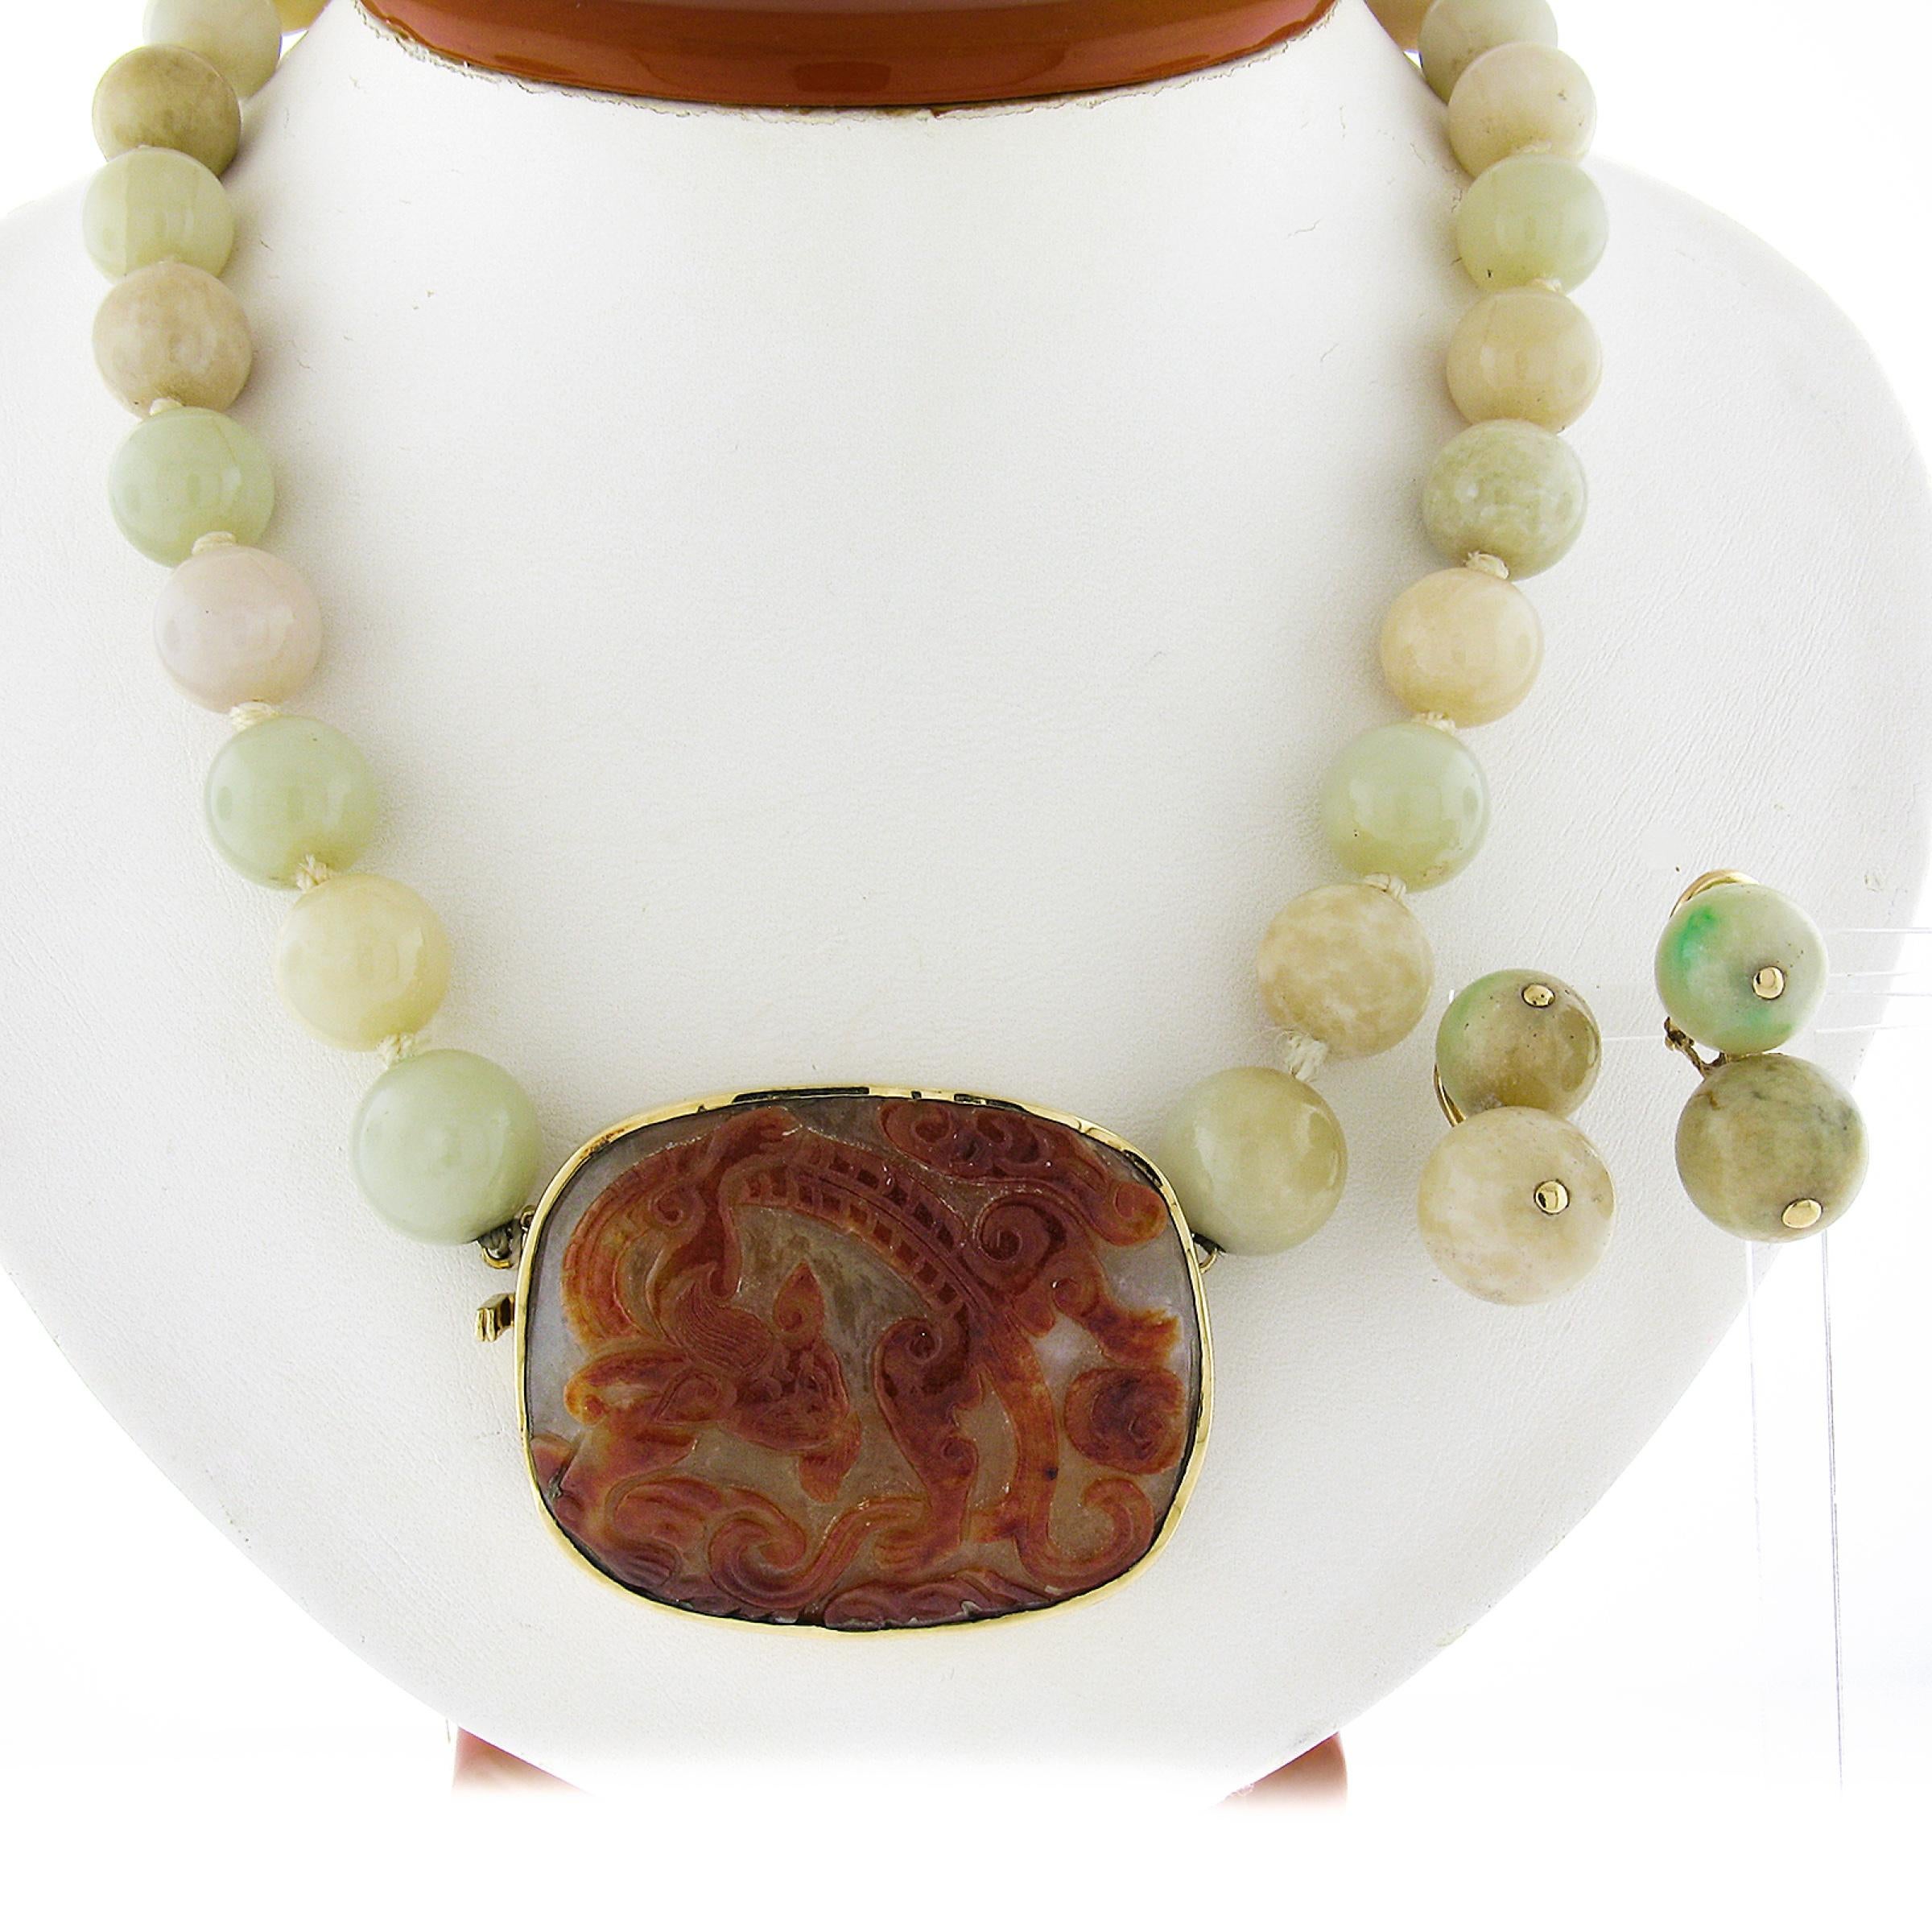 --Item Details (Necklace):--
--Stone(s):--
(1) Natural Jade - Carved Custom Cut - Bezel Set - Greenish Gray with Brown Carving - 47.41x38.05mm (Certified) ** See Certification Details Below for Complete Info **
(30) Natural Jade - Bead Ball Shape -